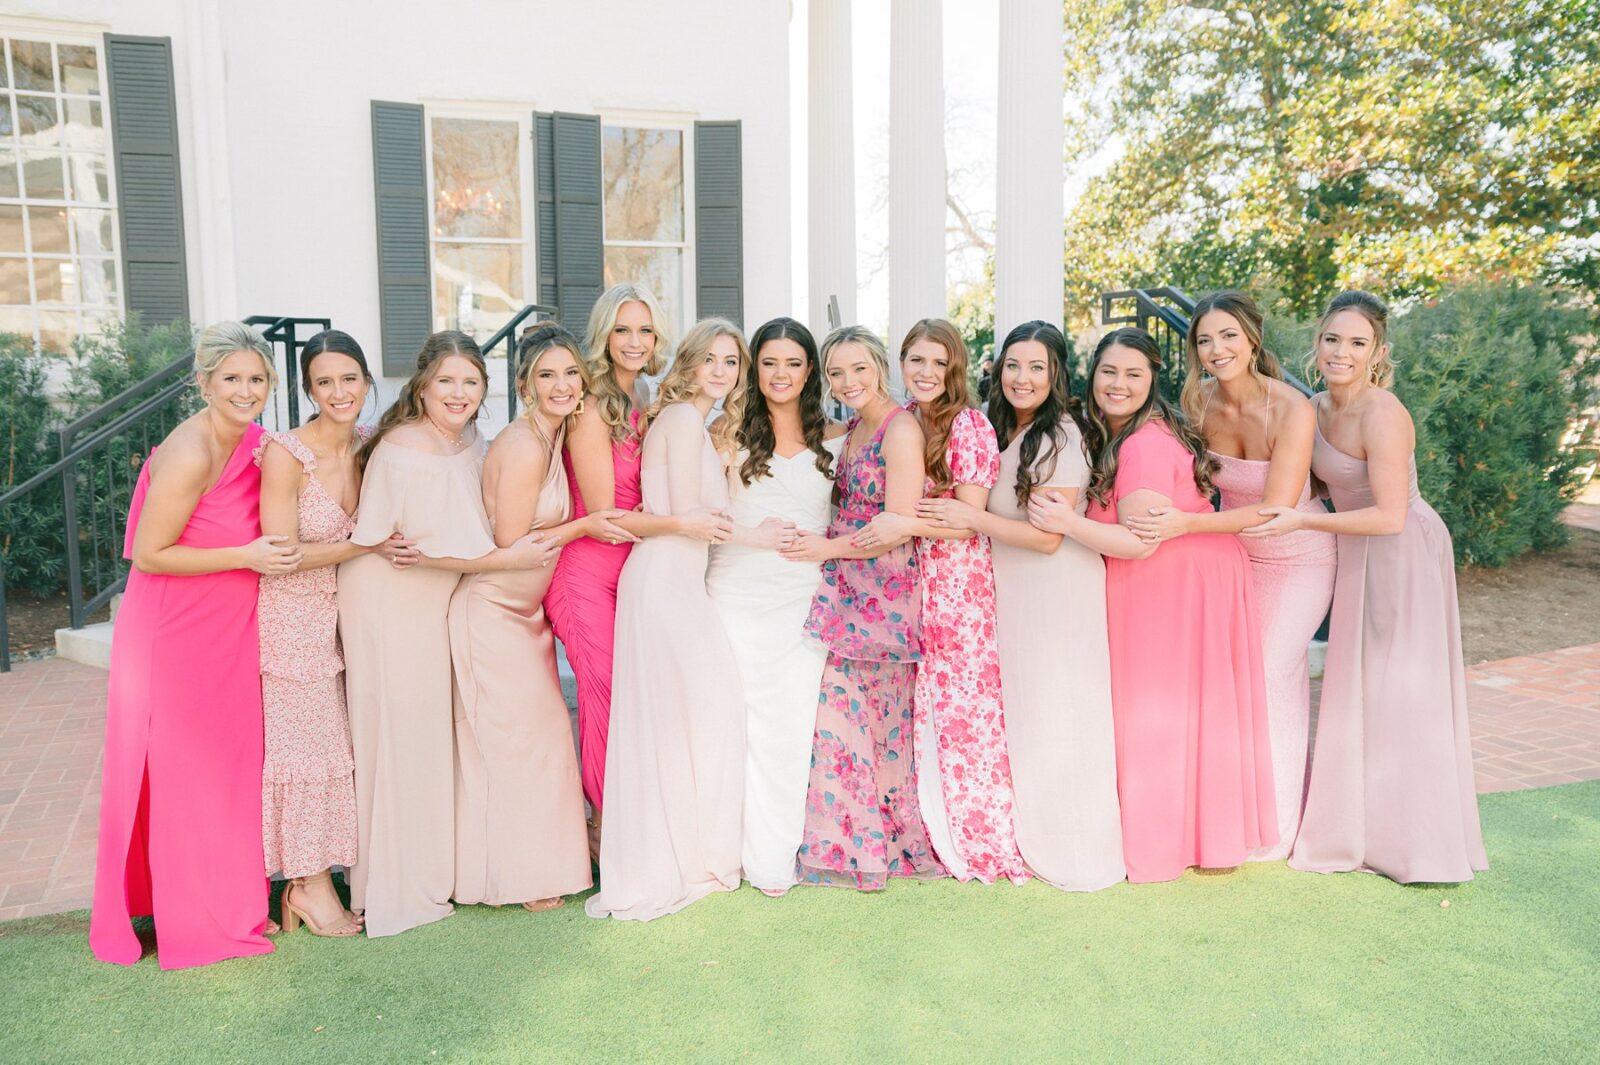 coordinating pink bridesmaid dresses, mismatched pink bridesmaid dresses, pink wedding decor, large wedding party, twelve bridesmaids, large wedding party posing ideas, wedding at Woodbine mansion in round rock texas, wedding photos by Tara Lyons Photography, planning by The event shop